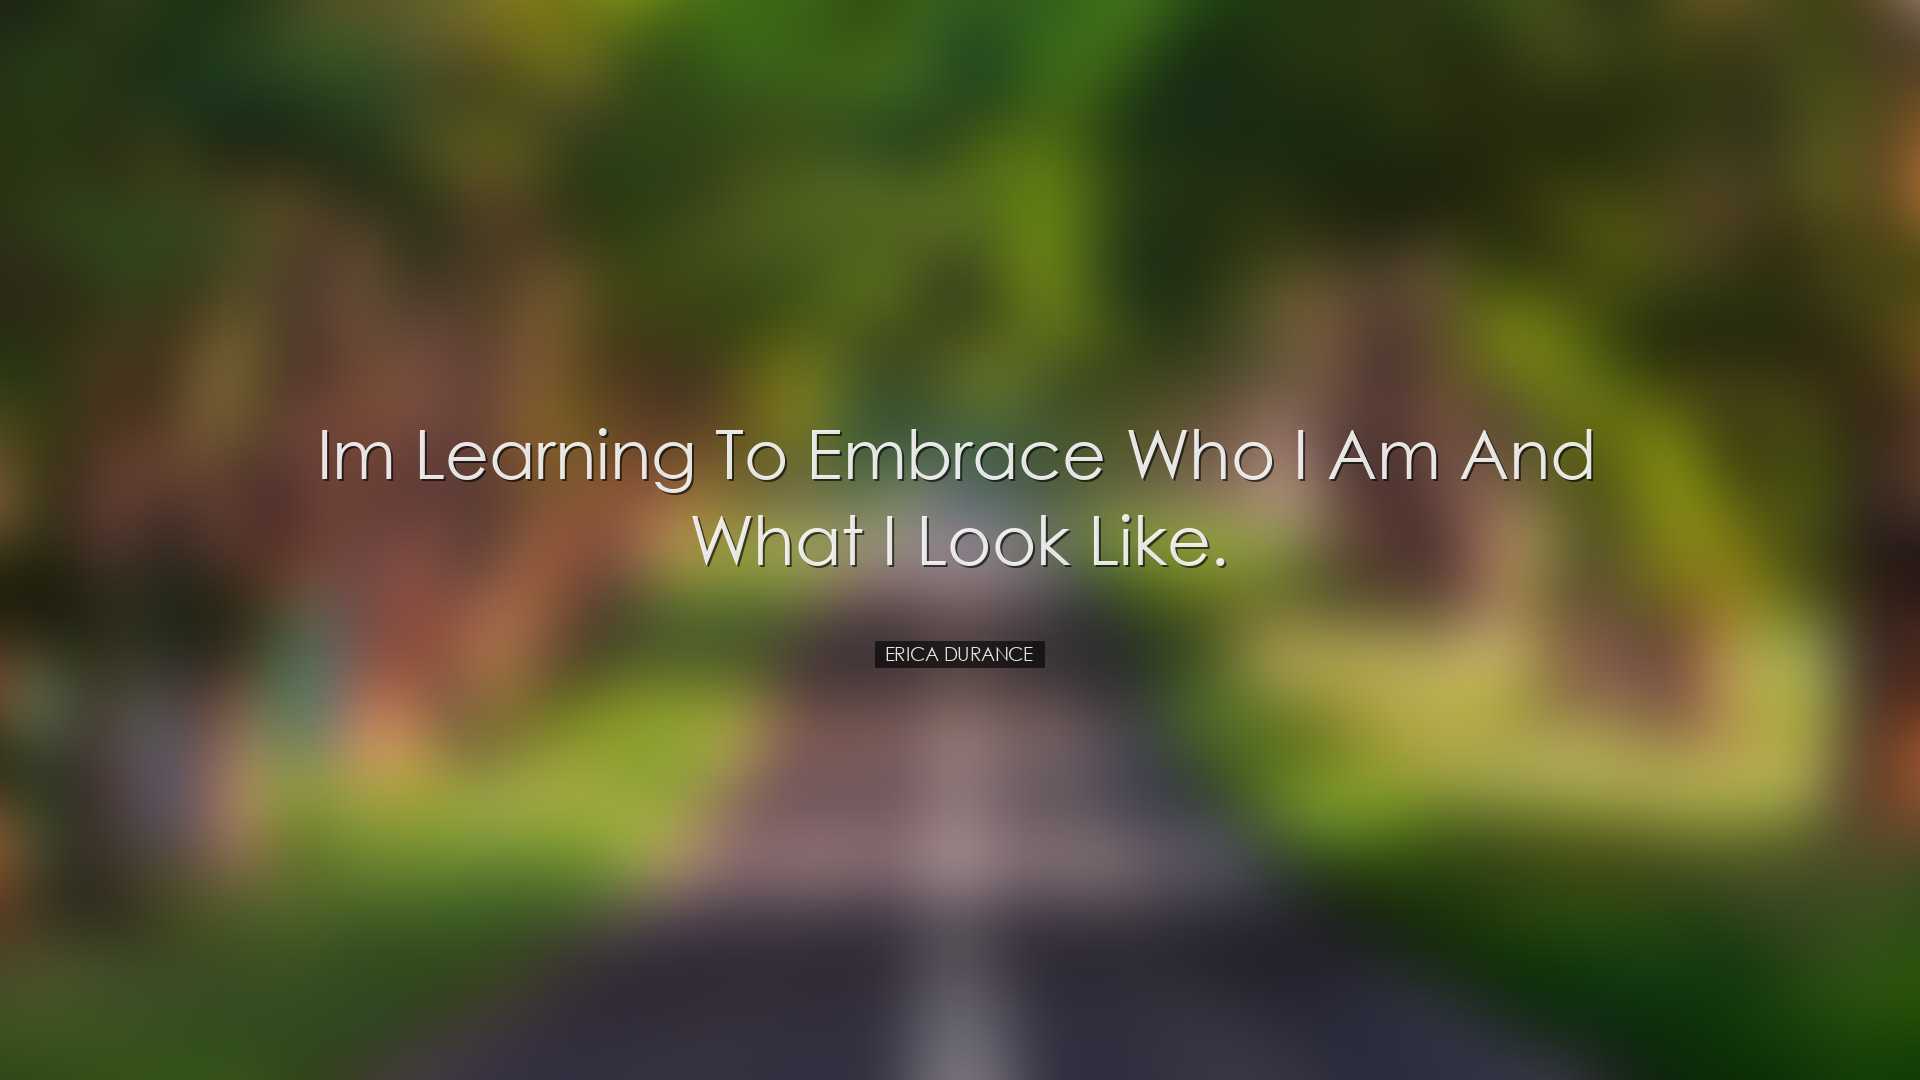 Im learning to embrace who I am and what I look like. - Erica Dura